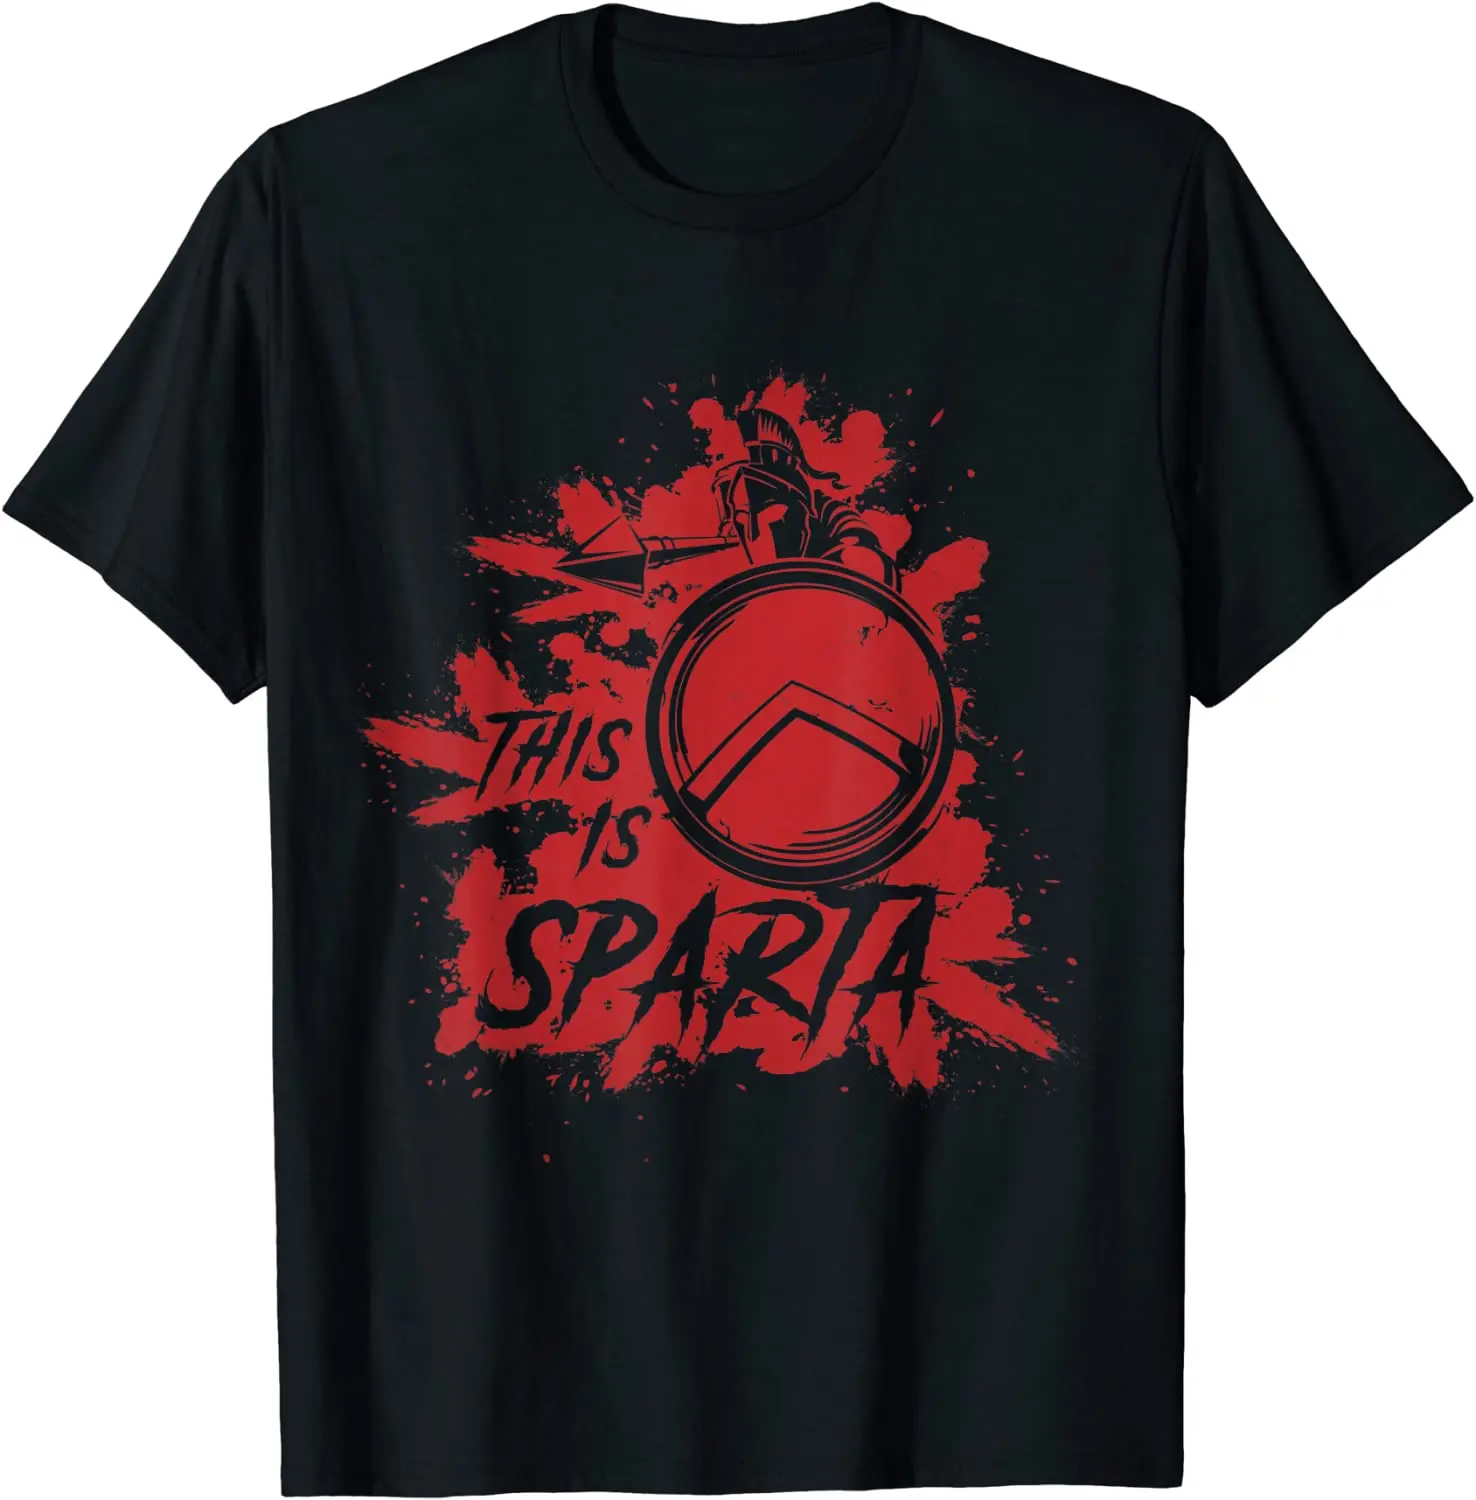 

This Is Sparta Blood Splatter Spartan Warrior Training T-Shirt New 100% Cotton Short Sleeve O-Neck T-shirt Casual Mens Top